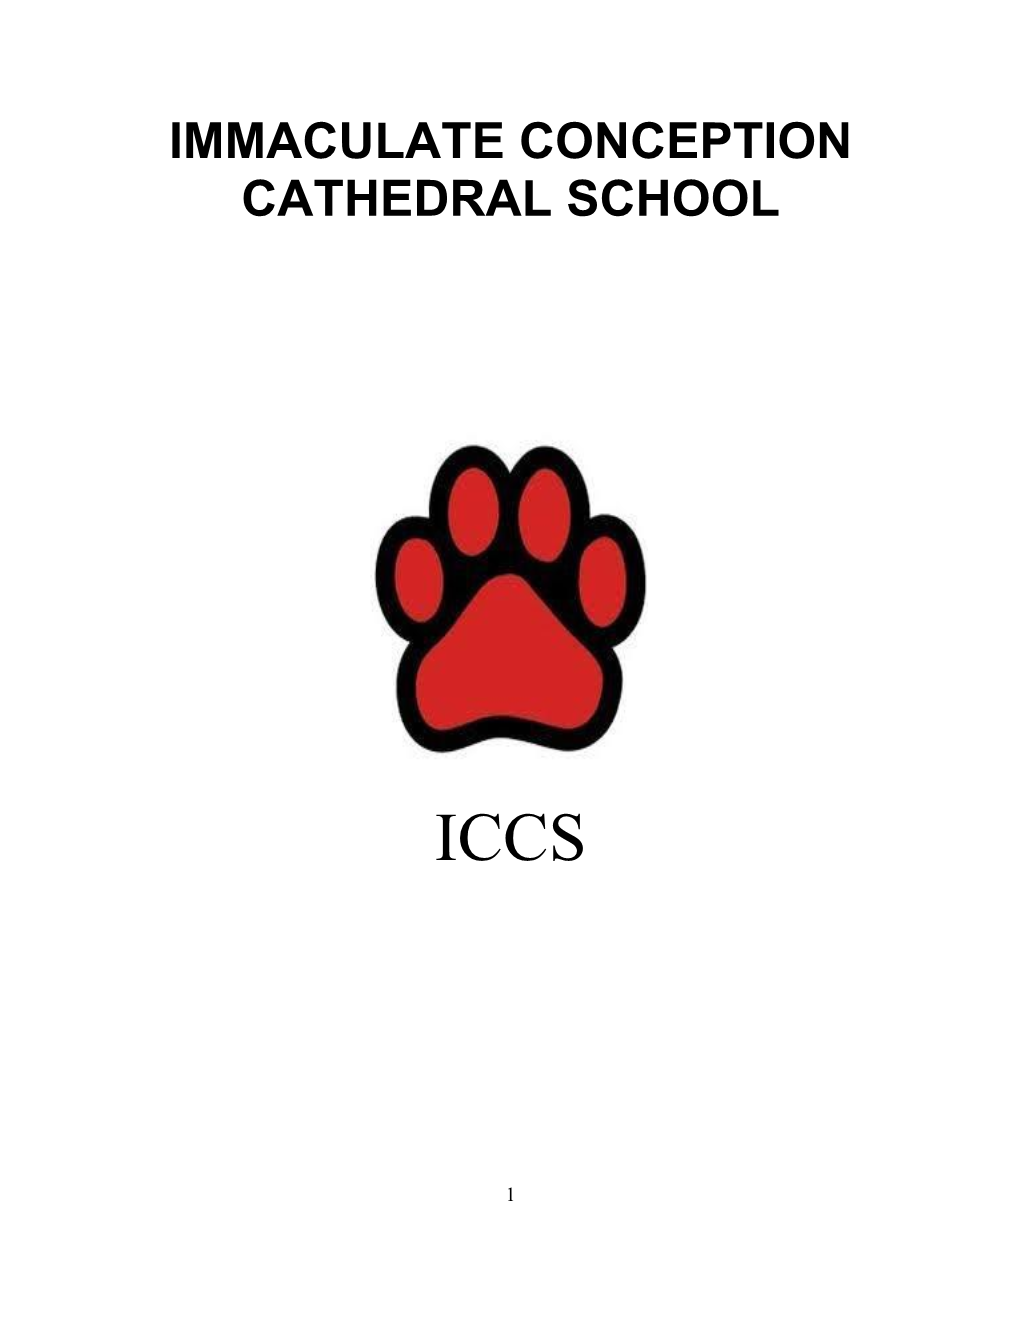 Immaculate Conception Cathedral School